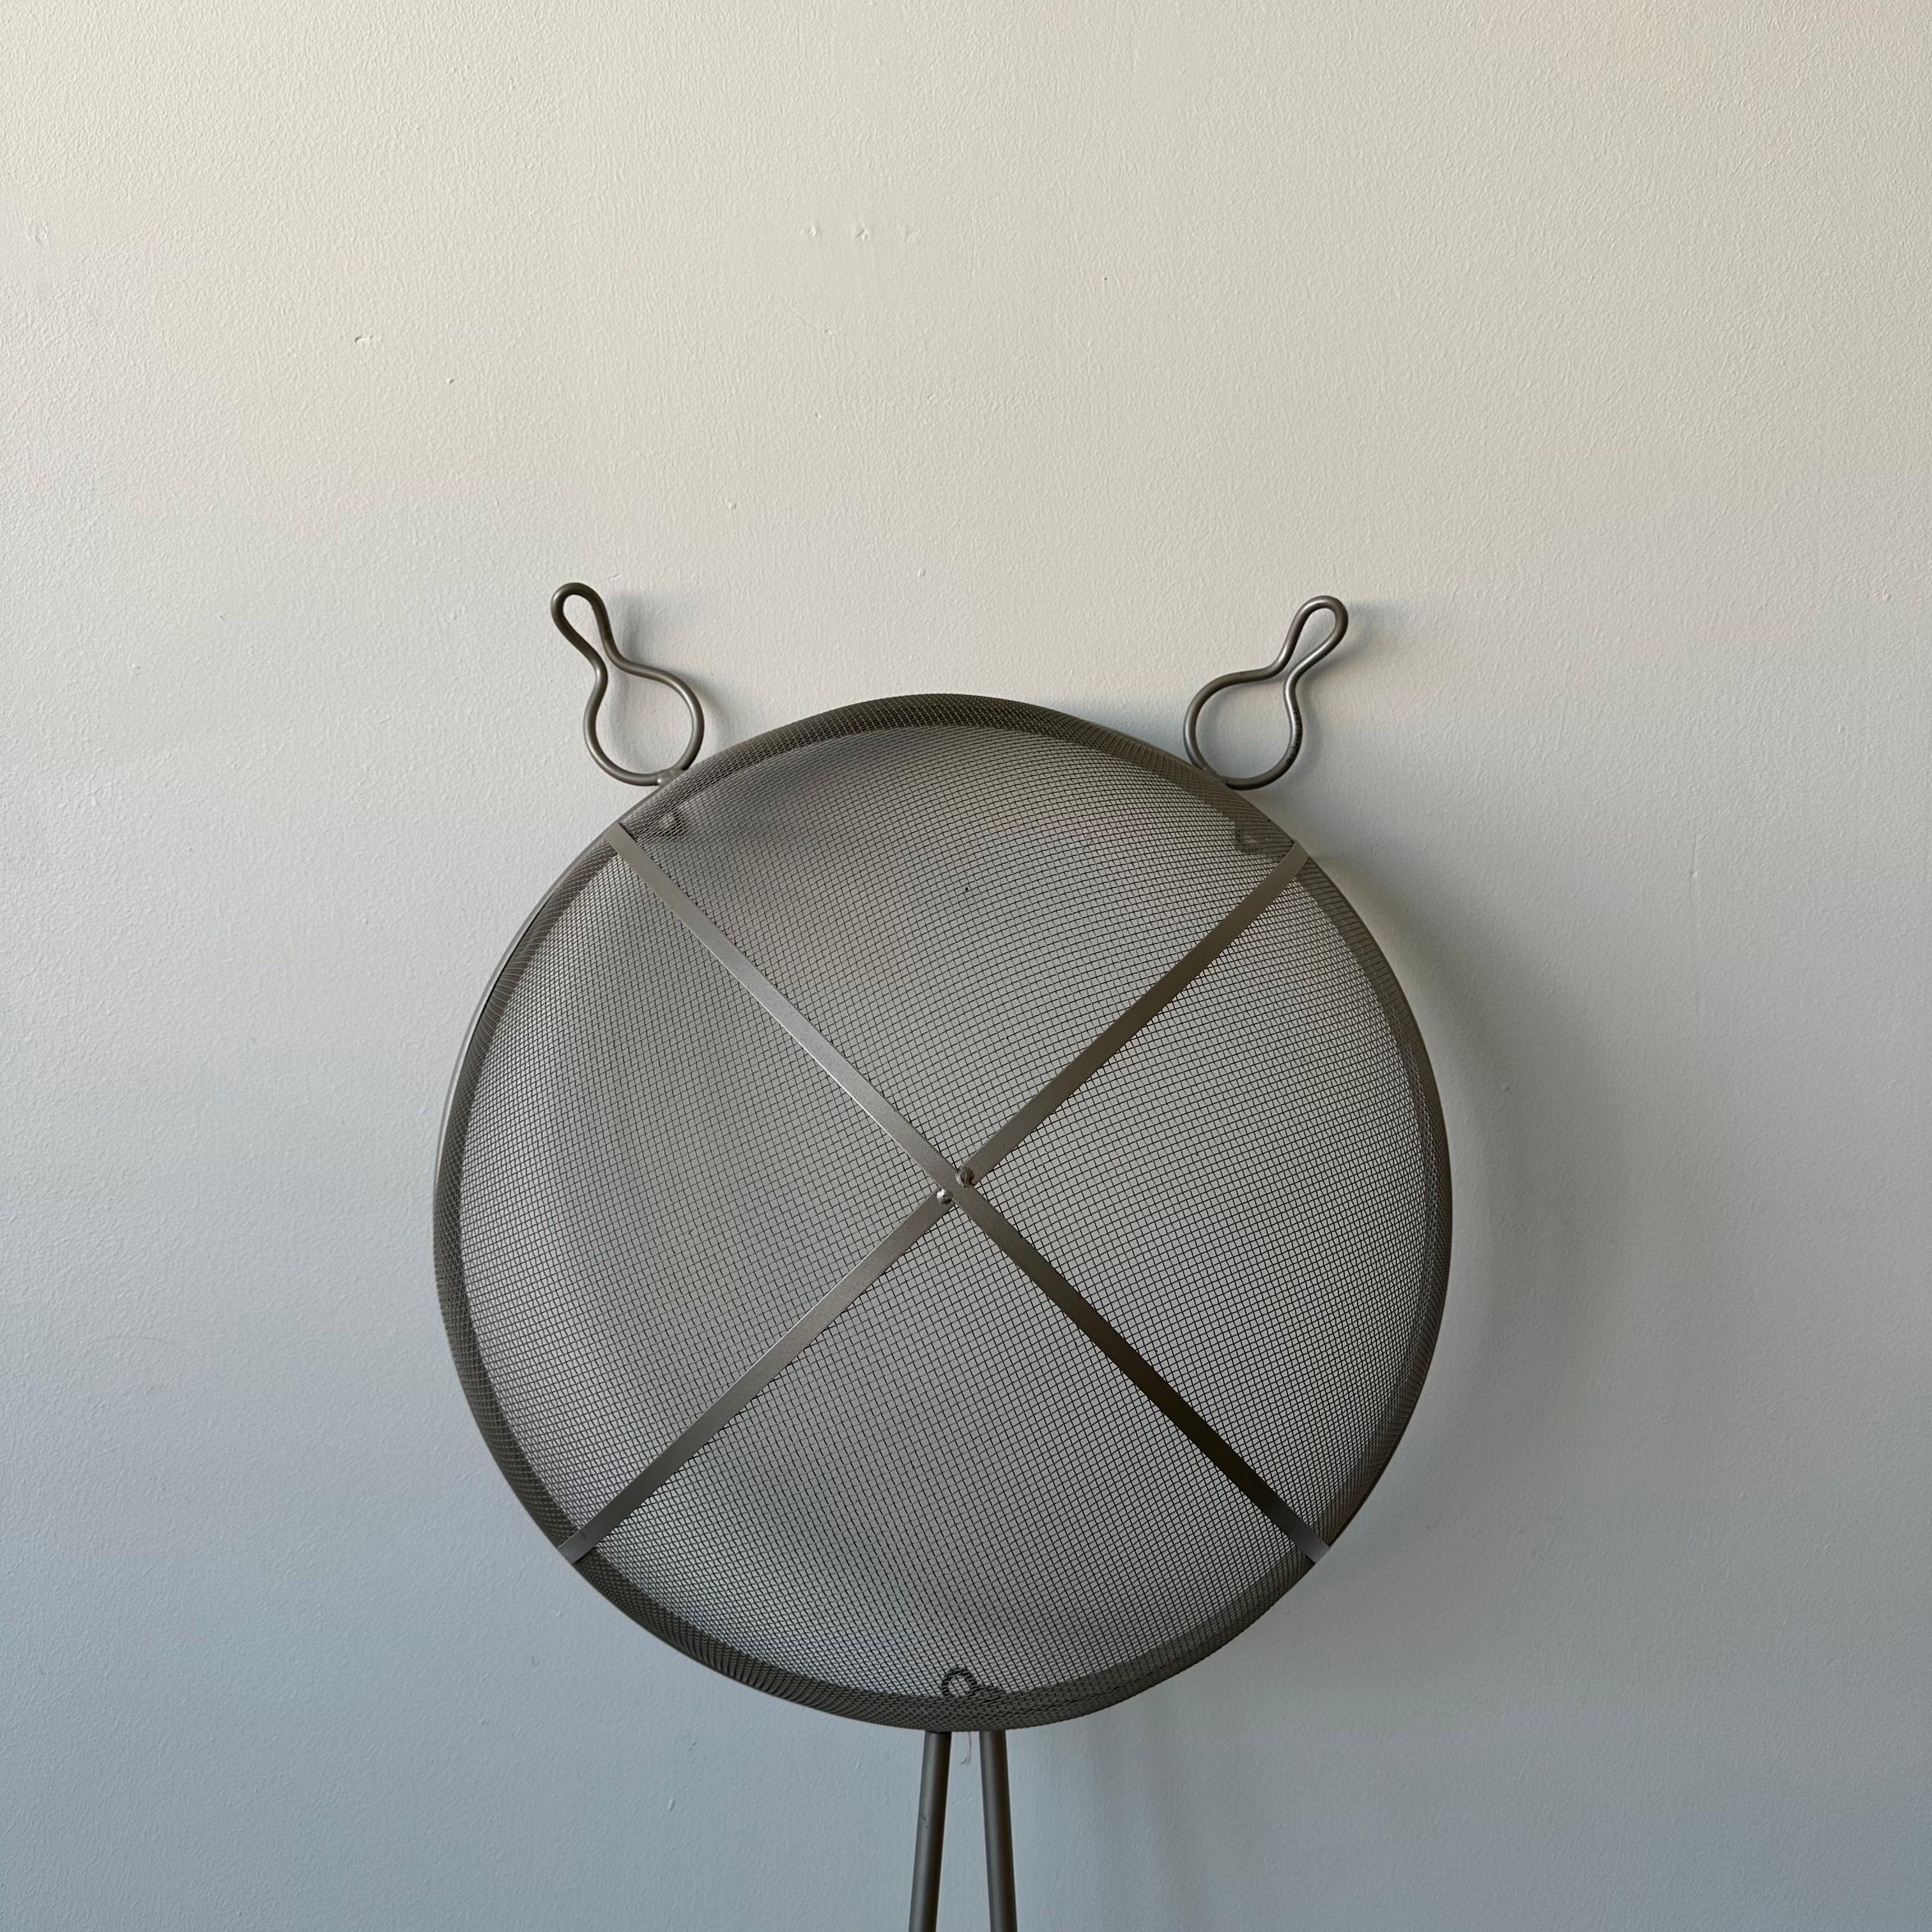 c. 1993, signed and dated, great vintage condition. Supersized C. Jere metal strainer wall sculpture from the company’s kitchen utensil series.